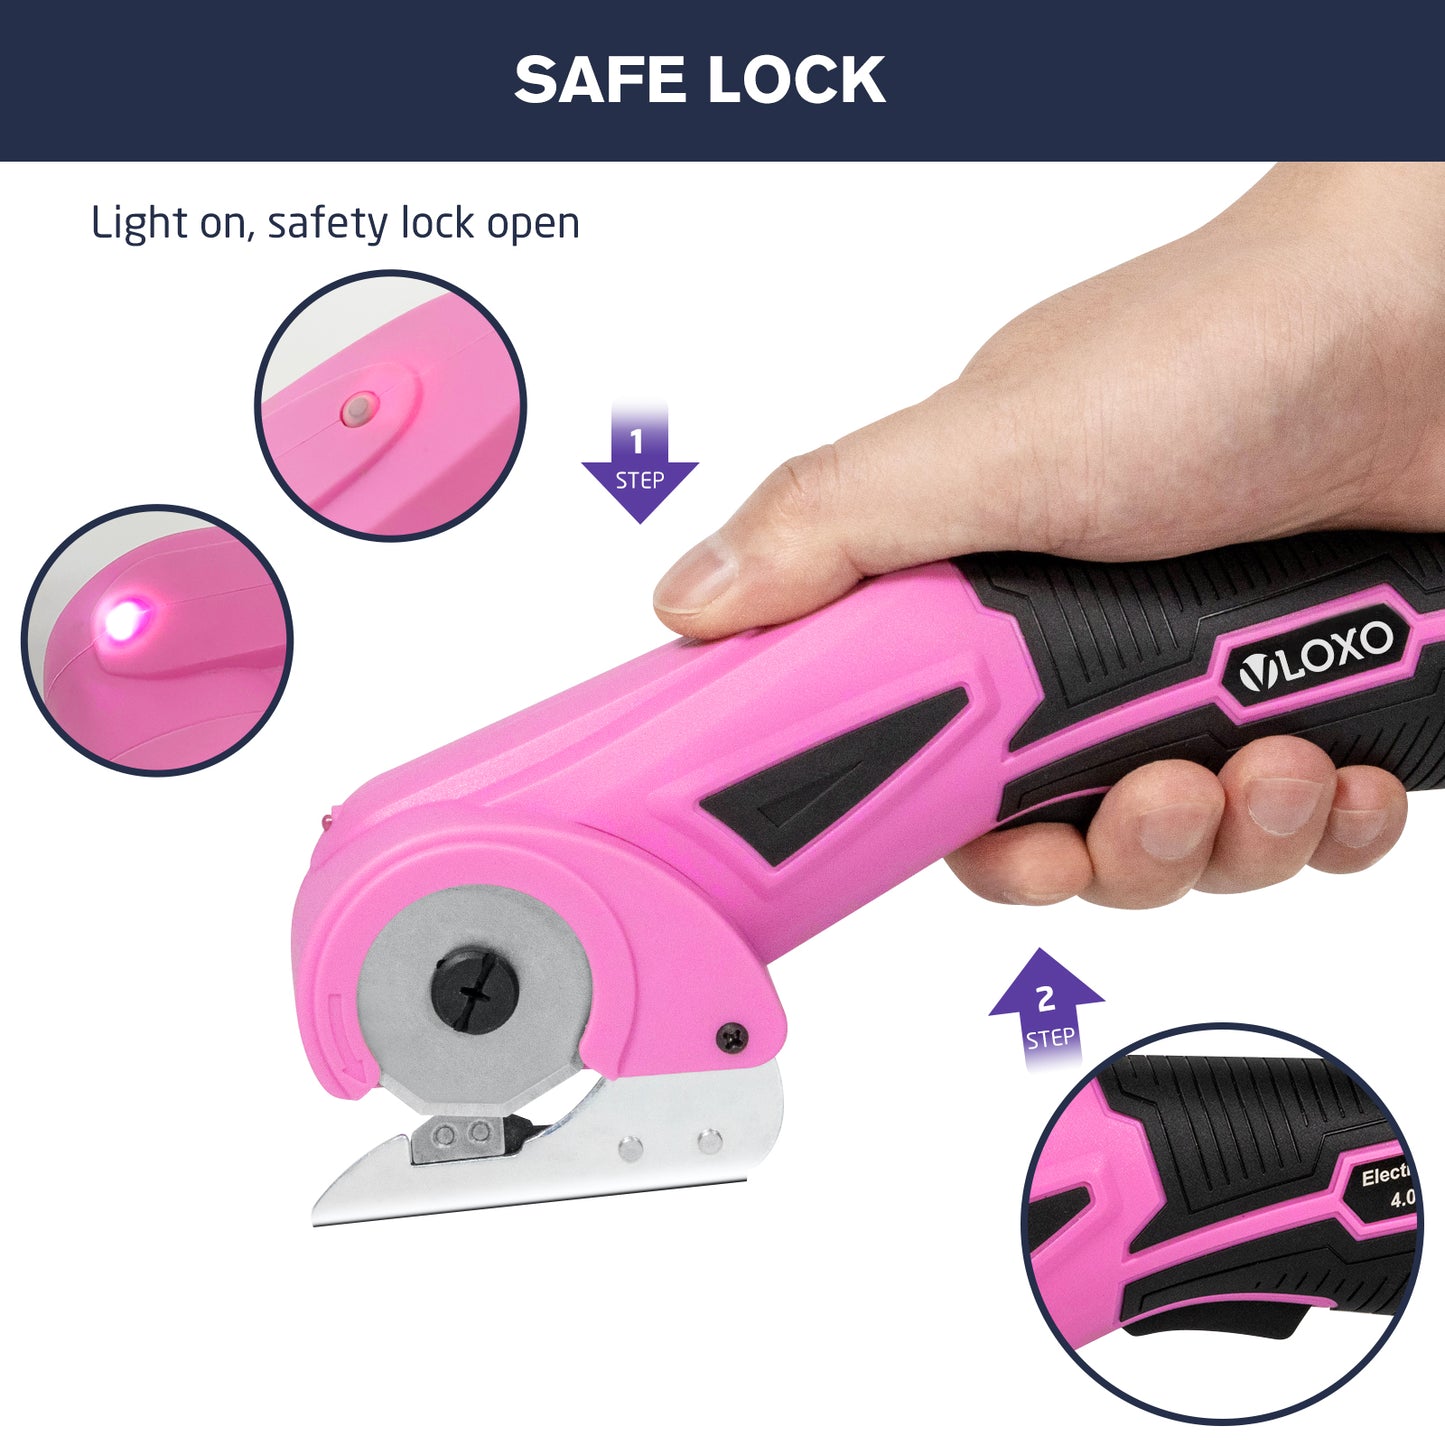 VLOXO Cordless Electric Scissors with Safety Lock 4.2V Rotary Cutter with Automatic Sharpening SystemFor Fabric Carpet Leather Felt and More